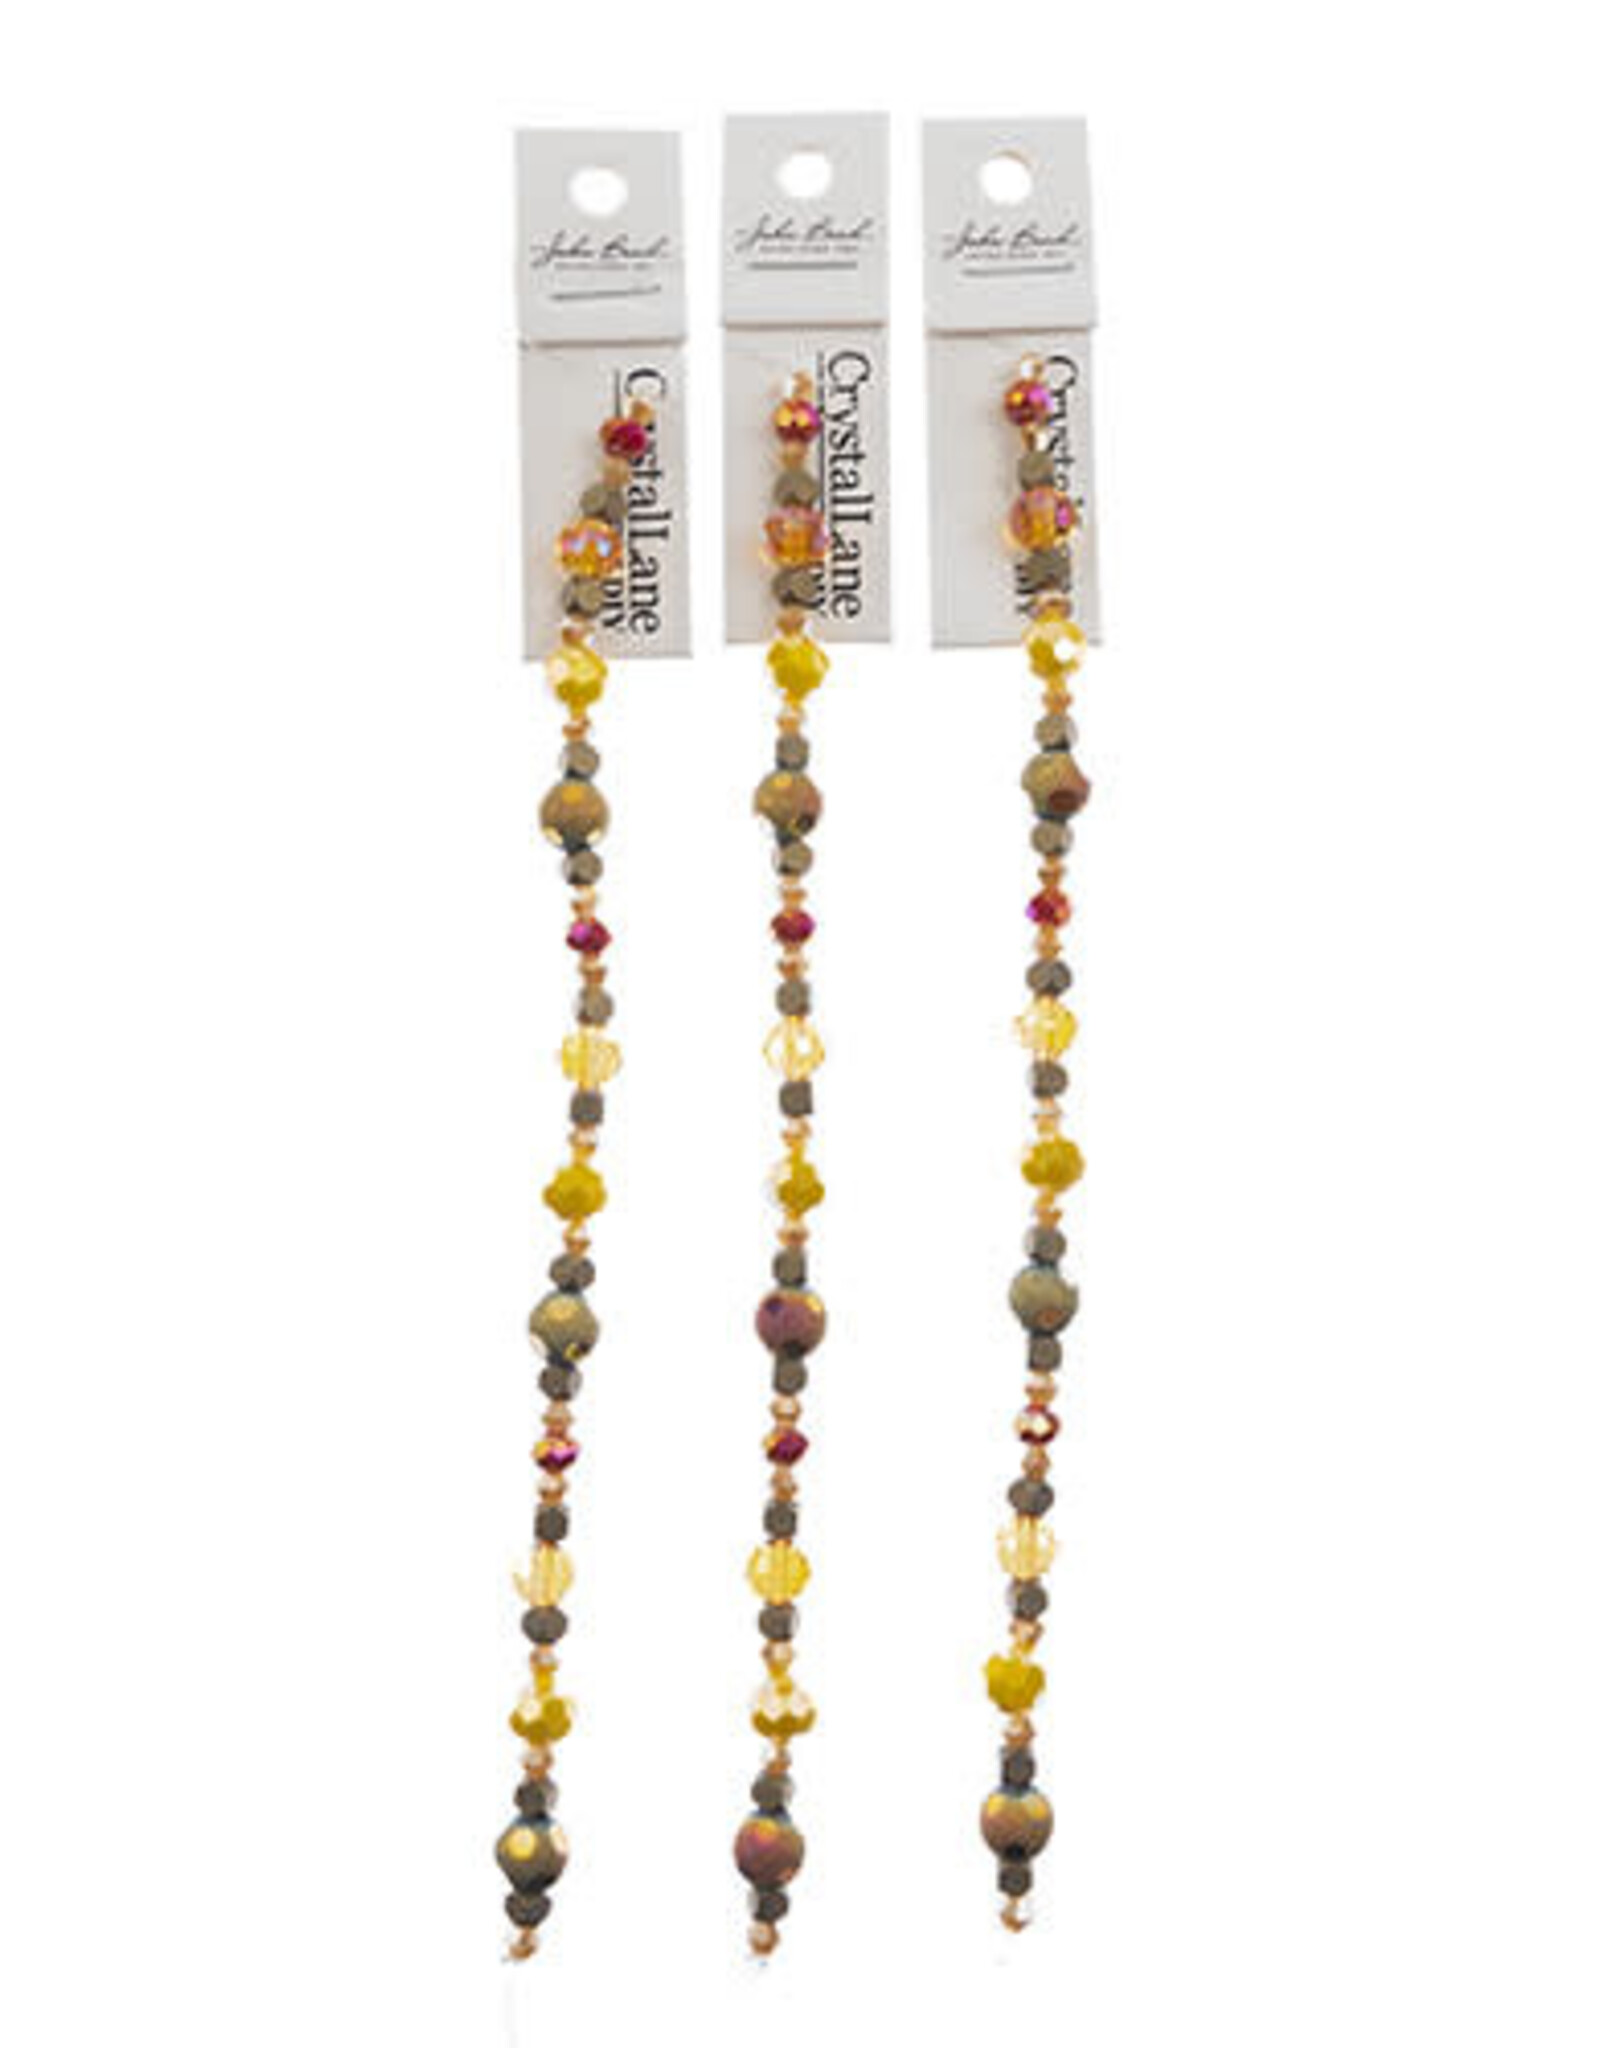 Crystal Lane Rondelle Crystal Lane DIY Designer 7in Bead Strand Glass and Hematite Orange and Yellow Assorted